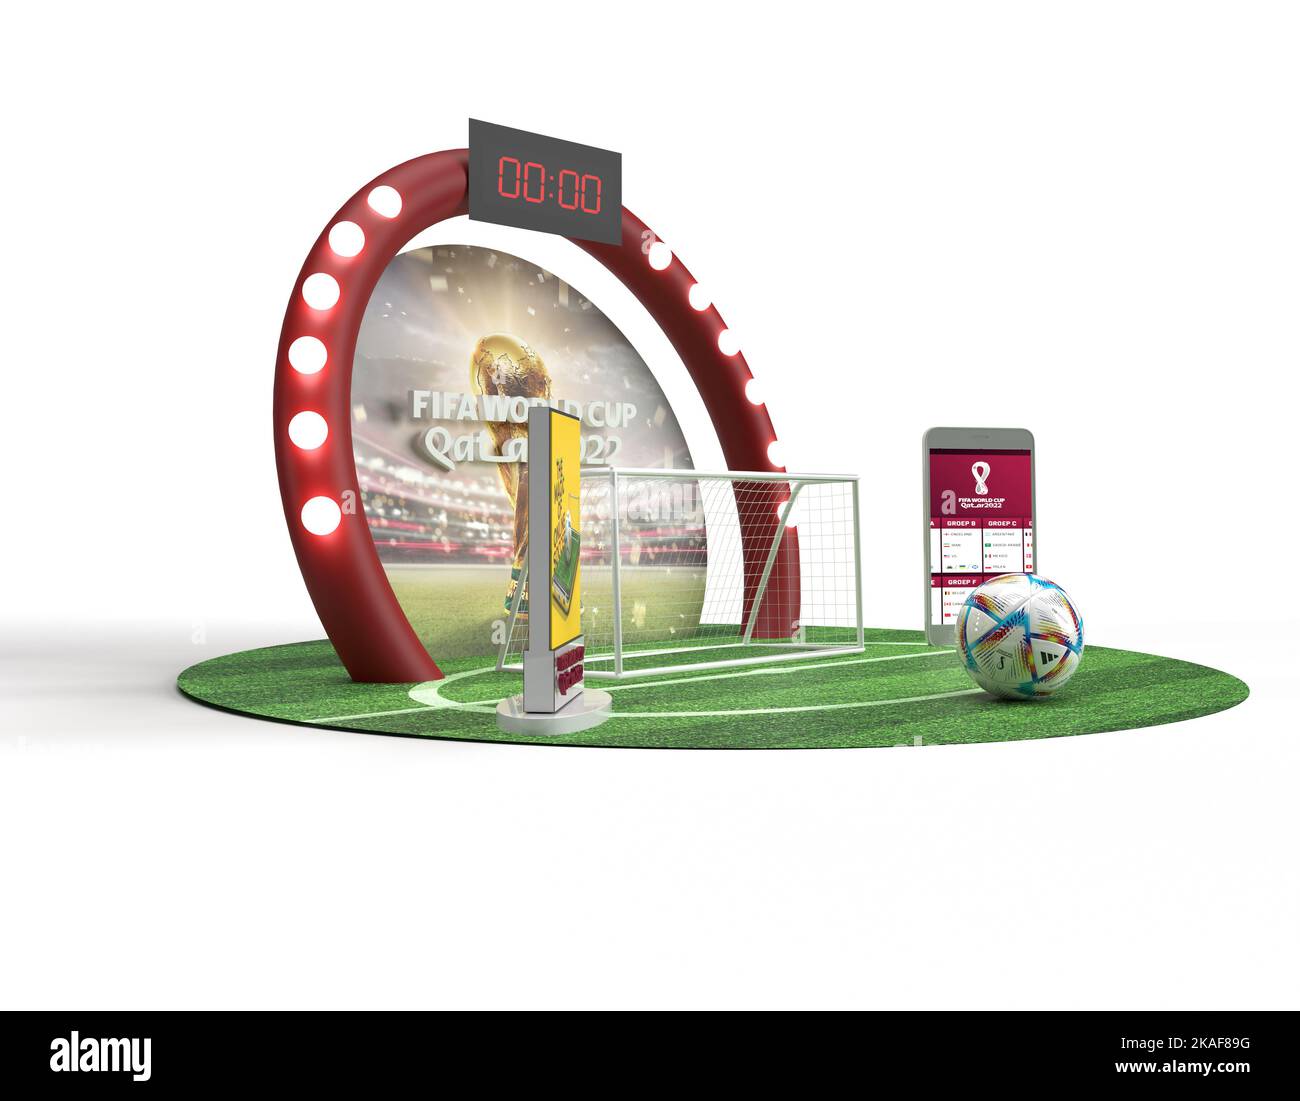 Qatar stages FIFA World Cup™ mascot exhibition at City Center Mall